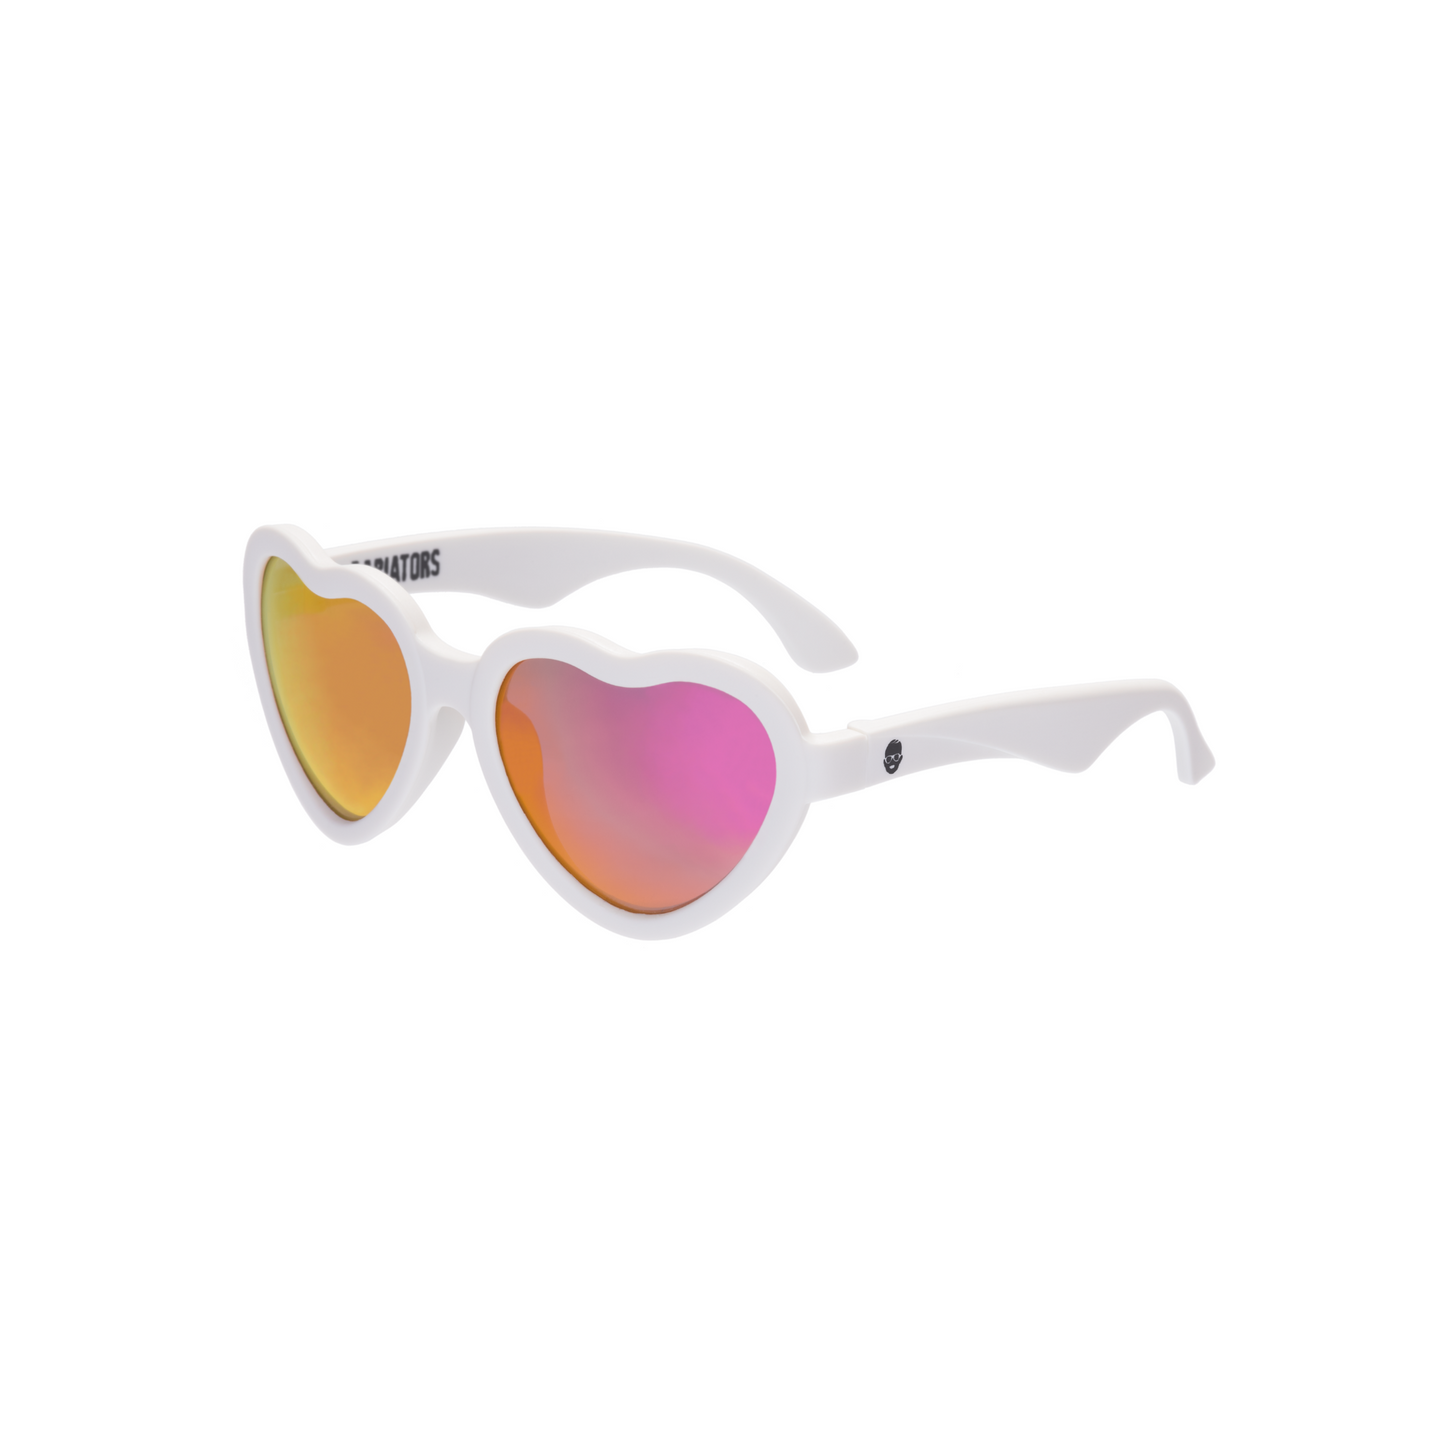 The Sweetheart: Wicked White/Polarized pink